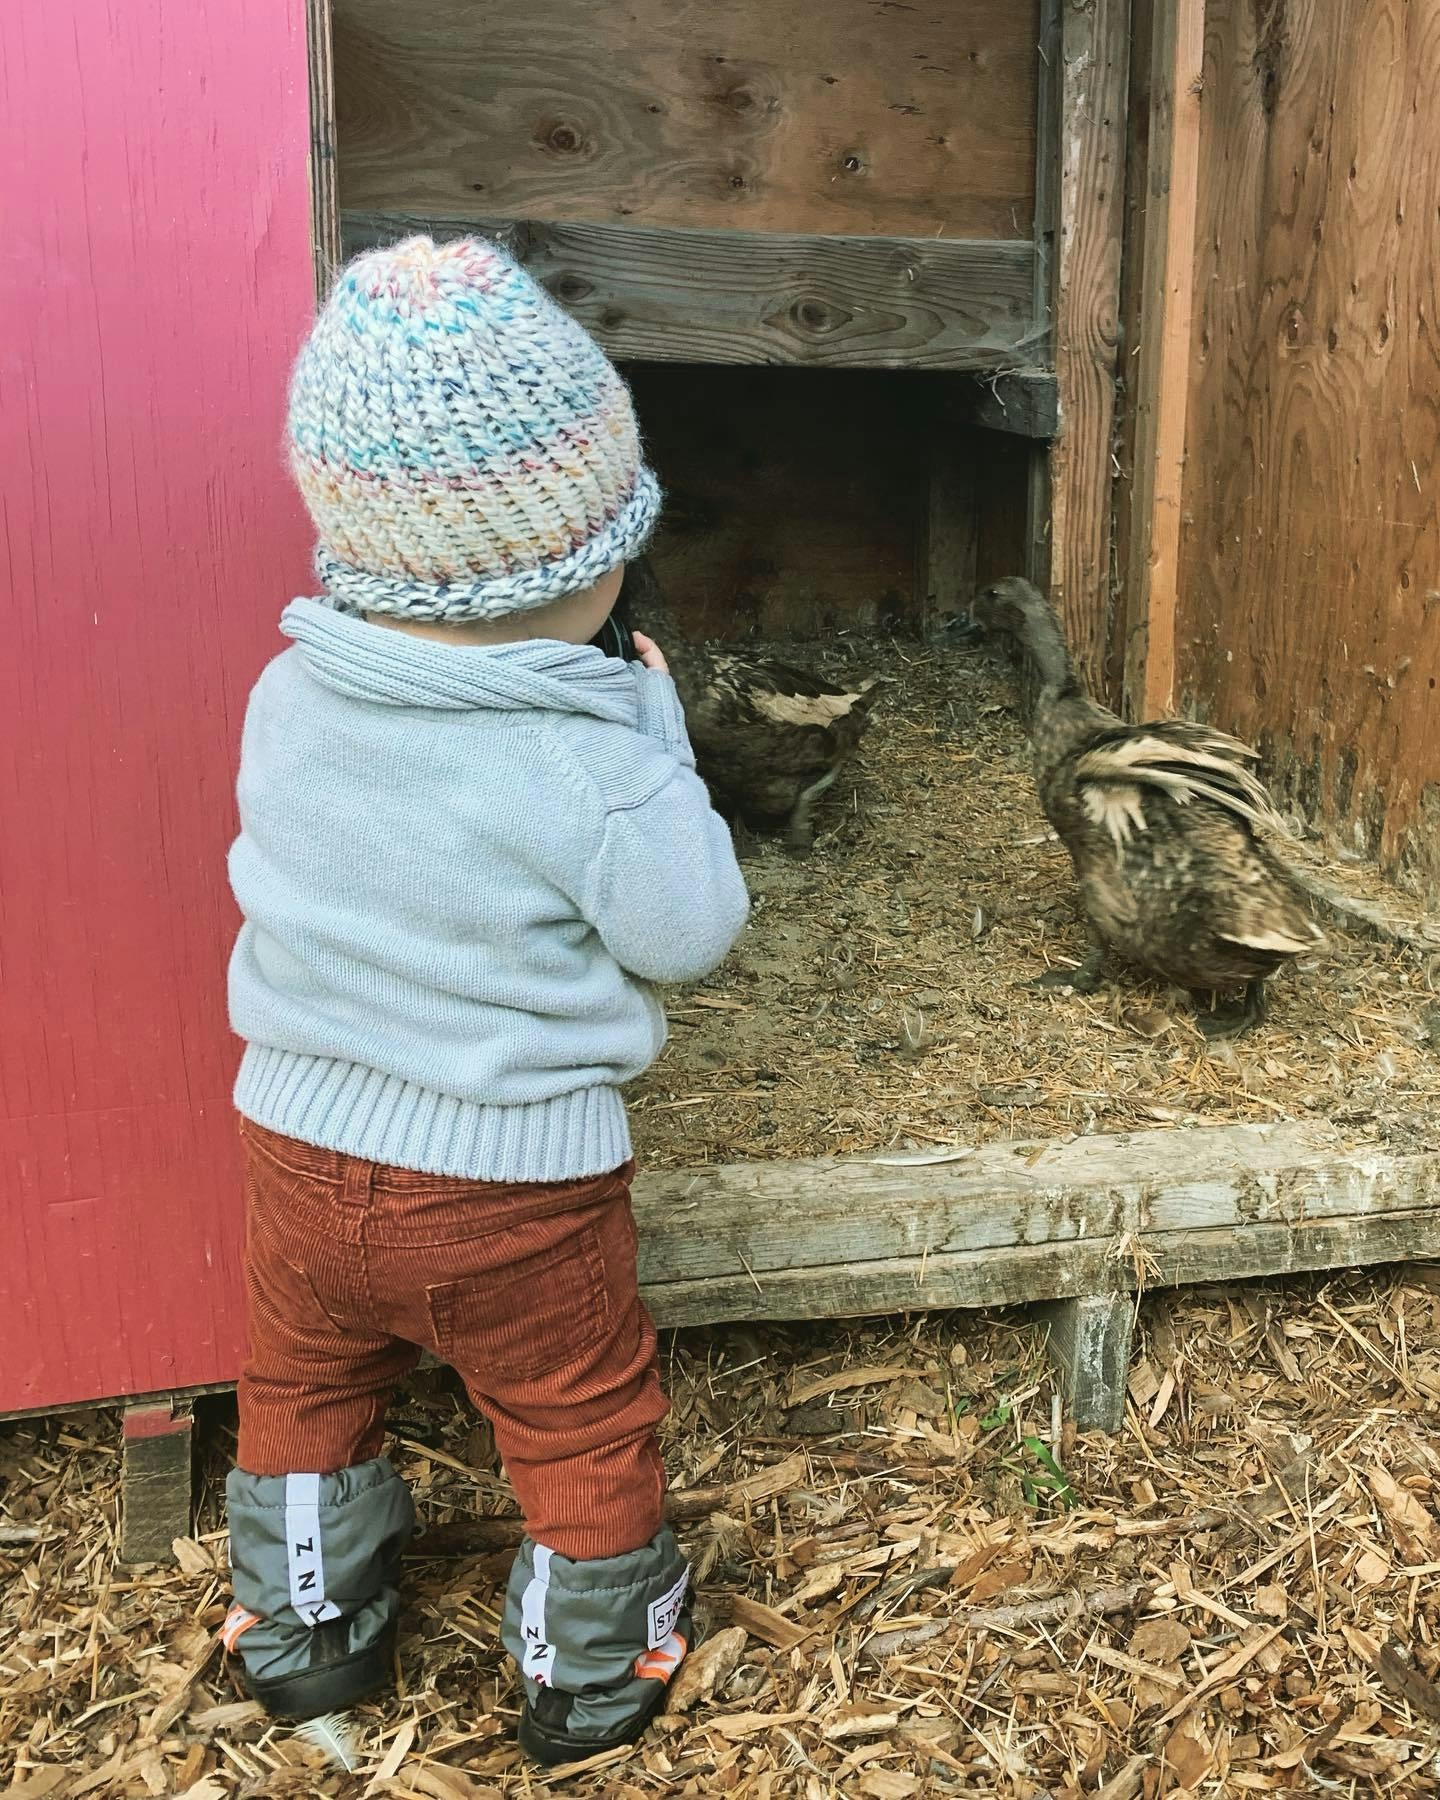 Children are curious by nature. 
It’s our job to cultivate and keep that fire alive.

#gentleparenting #conciousparenting #respectfulparenting #mccolloughfarms #farmlife #farmbaby